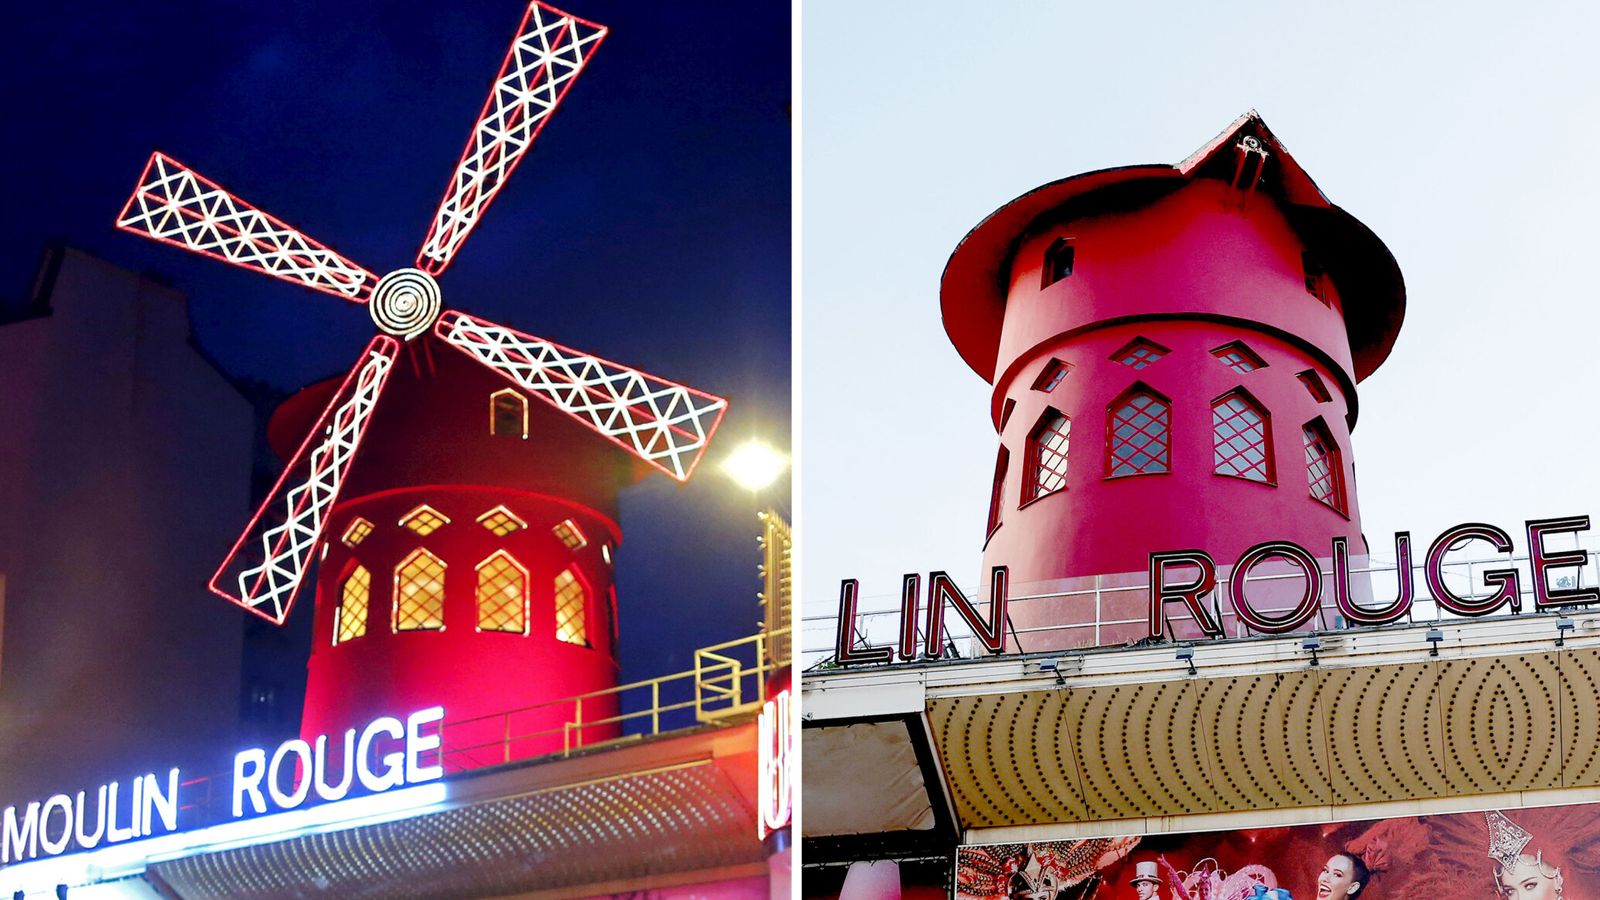 Blades of Windmill Atop Parisian Moulin Rouge Falls Off, Sign Damaged